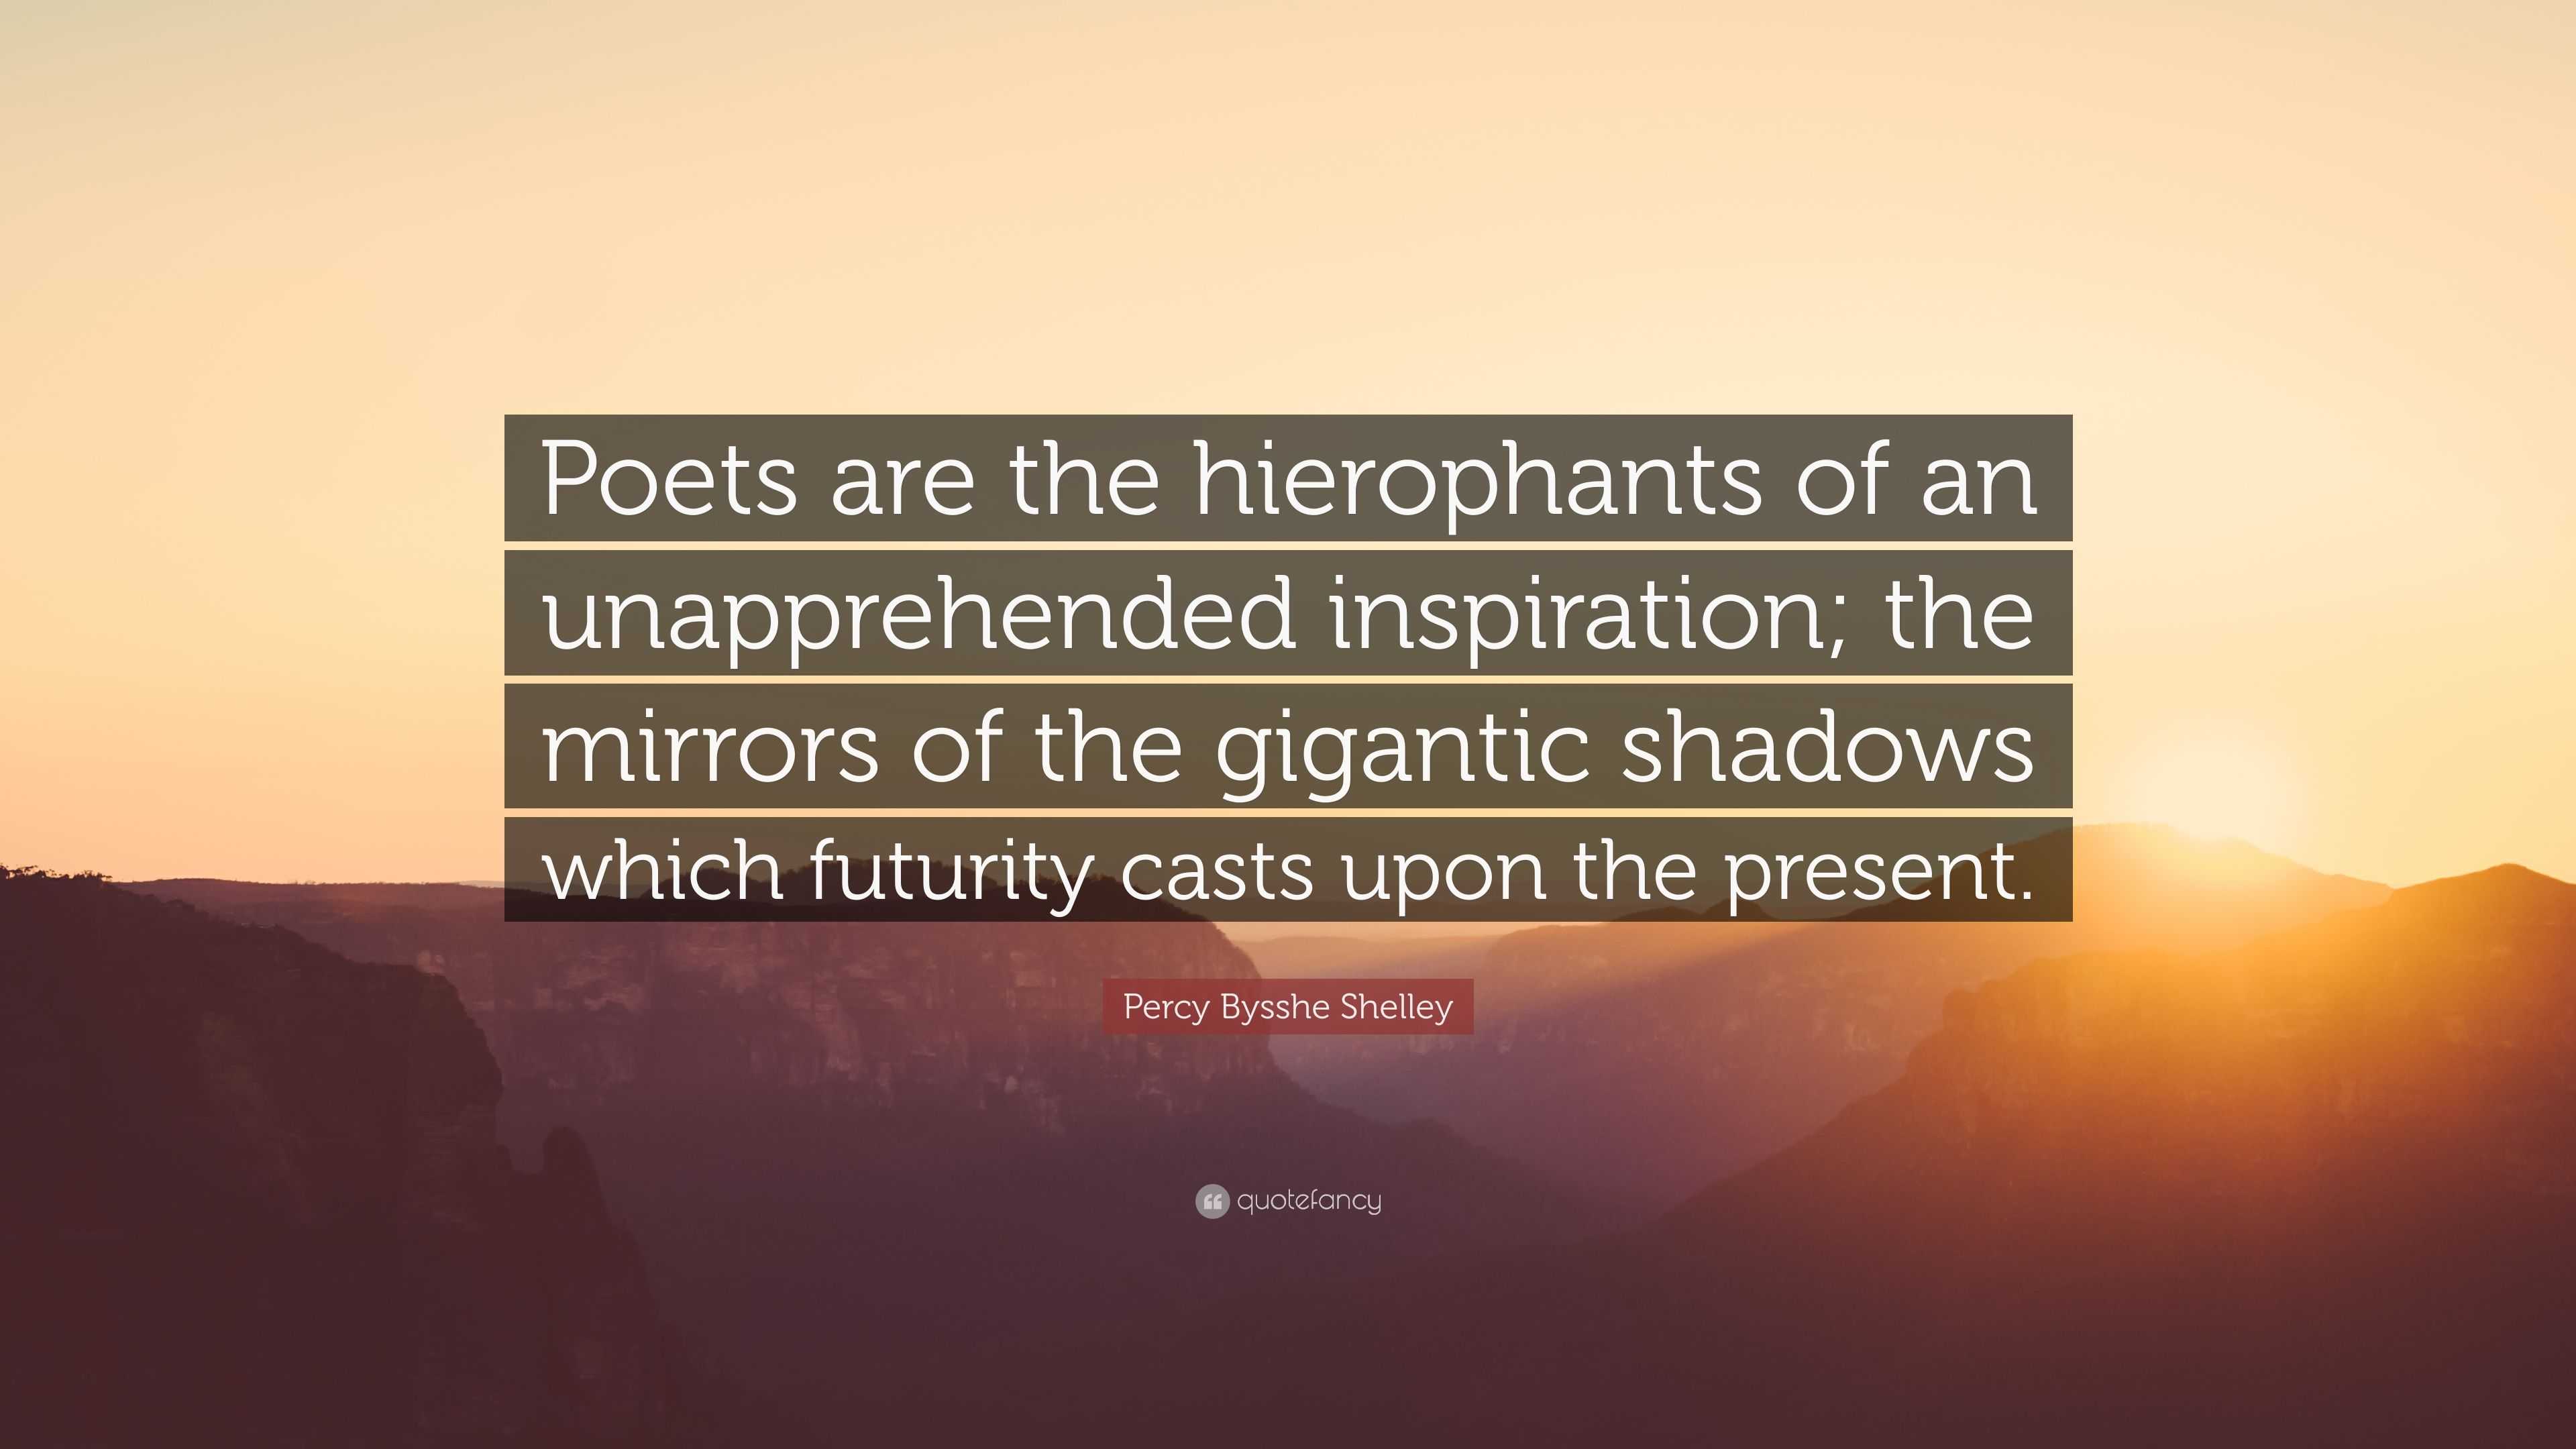 percy bysshe shelley quote: "poets are the hierophants of an un